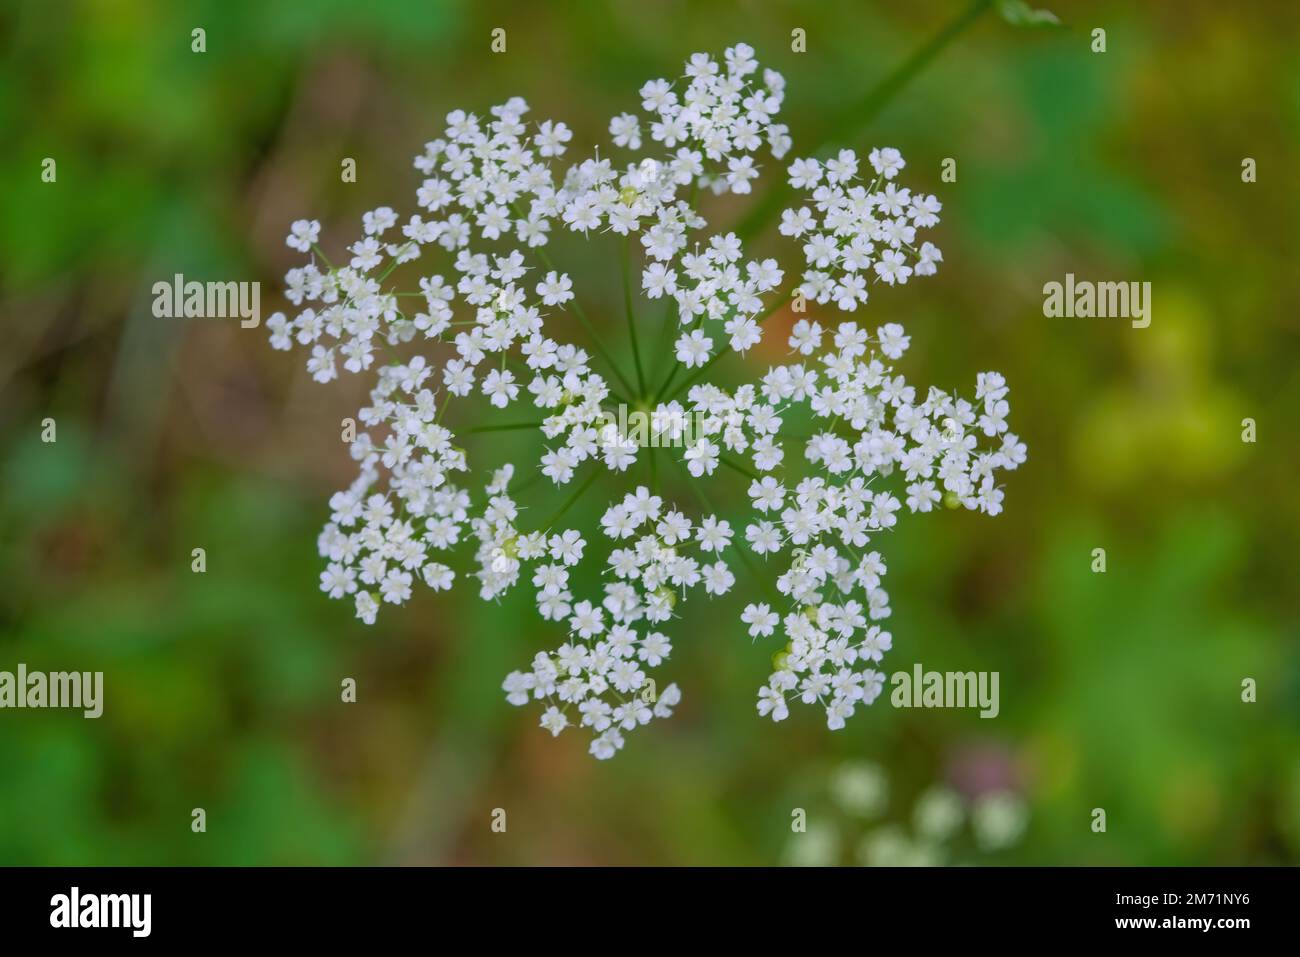 Macro of blooming white Pimpinella Saxifraga or burnet-saxifrage flowers plant with blurred background. Natural wild lawn. Stock Photo